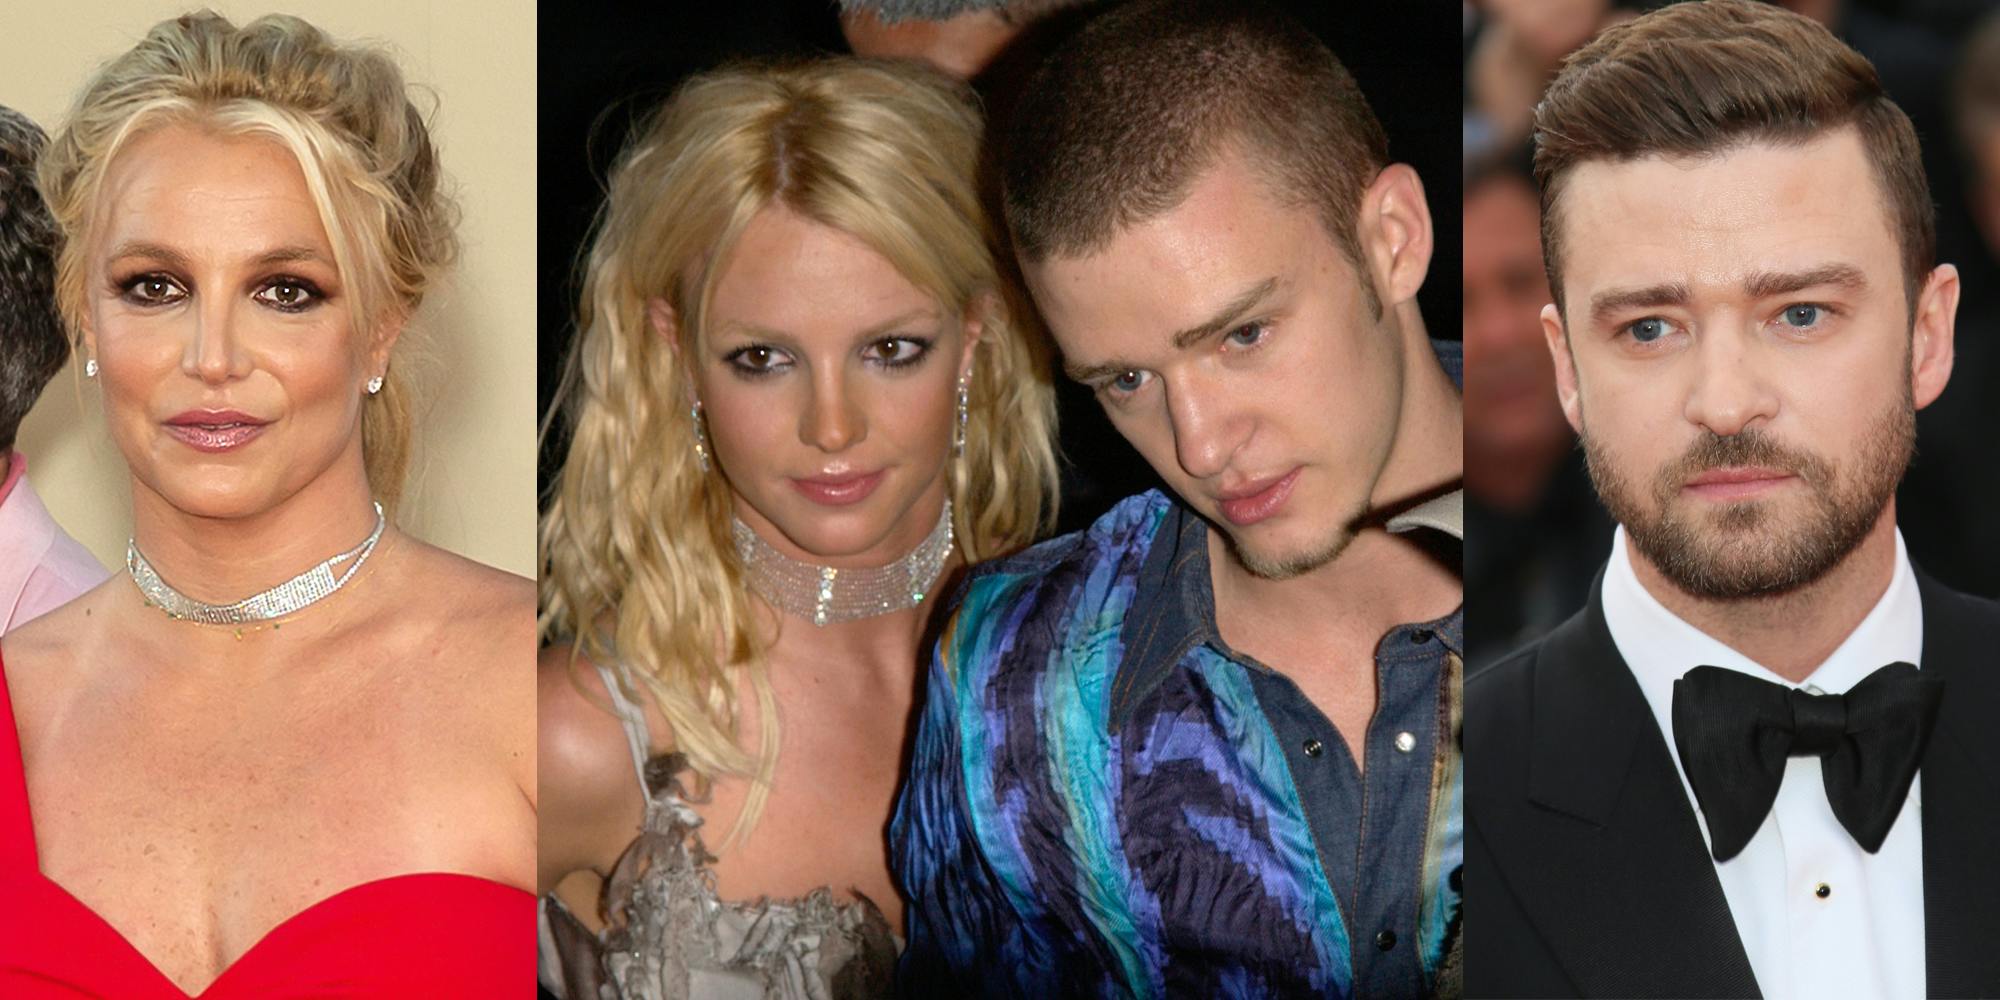 Britney Spears Had an Abortion with Justin Timberlake